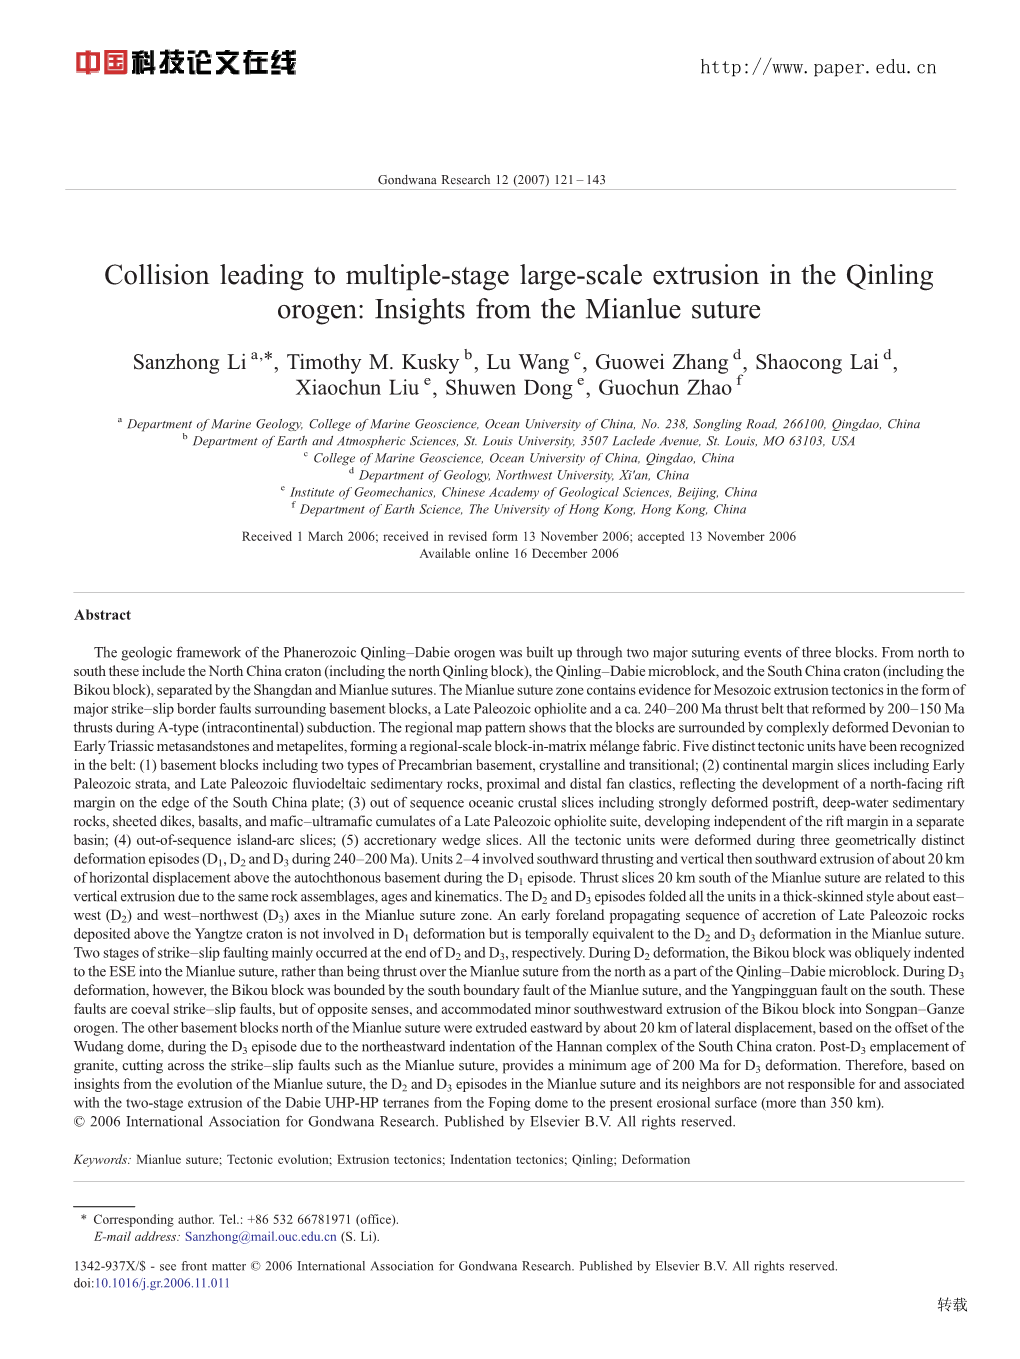 Collision Leading to Multiple-Stage Large-Scale Extrusion in the Qinling Orogen: Insights from the Mianlue Suture ⁎ Sanzhong Li A, , Timothy M